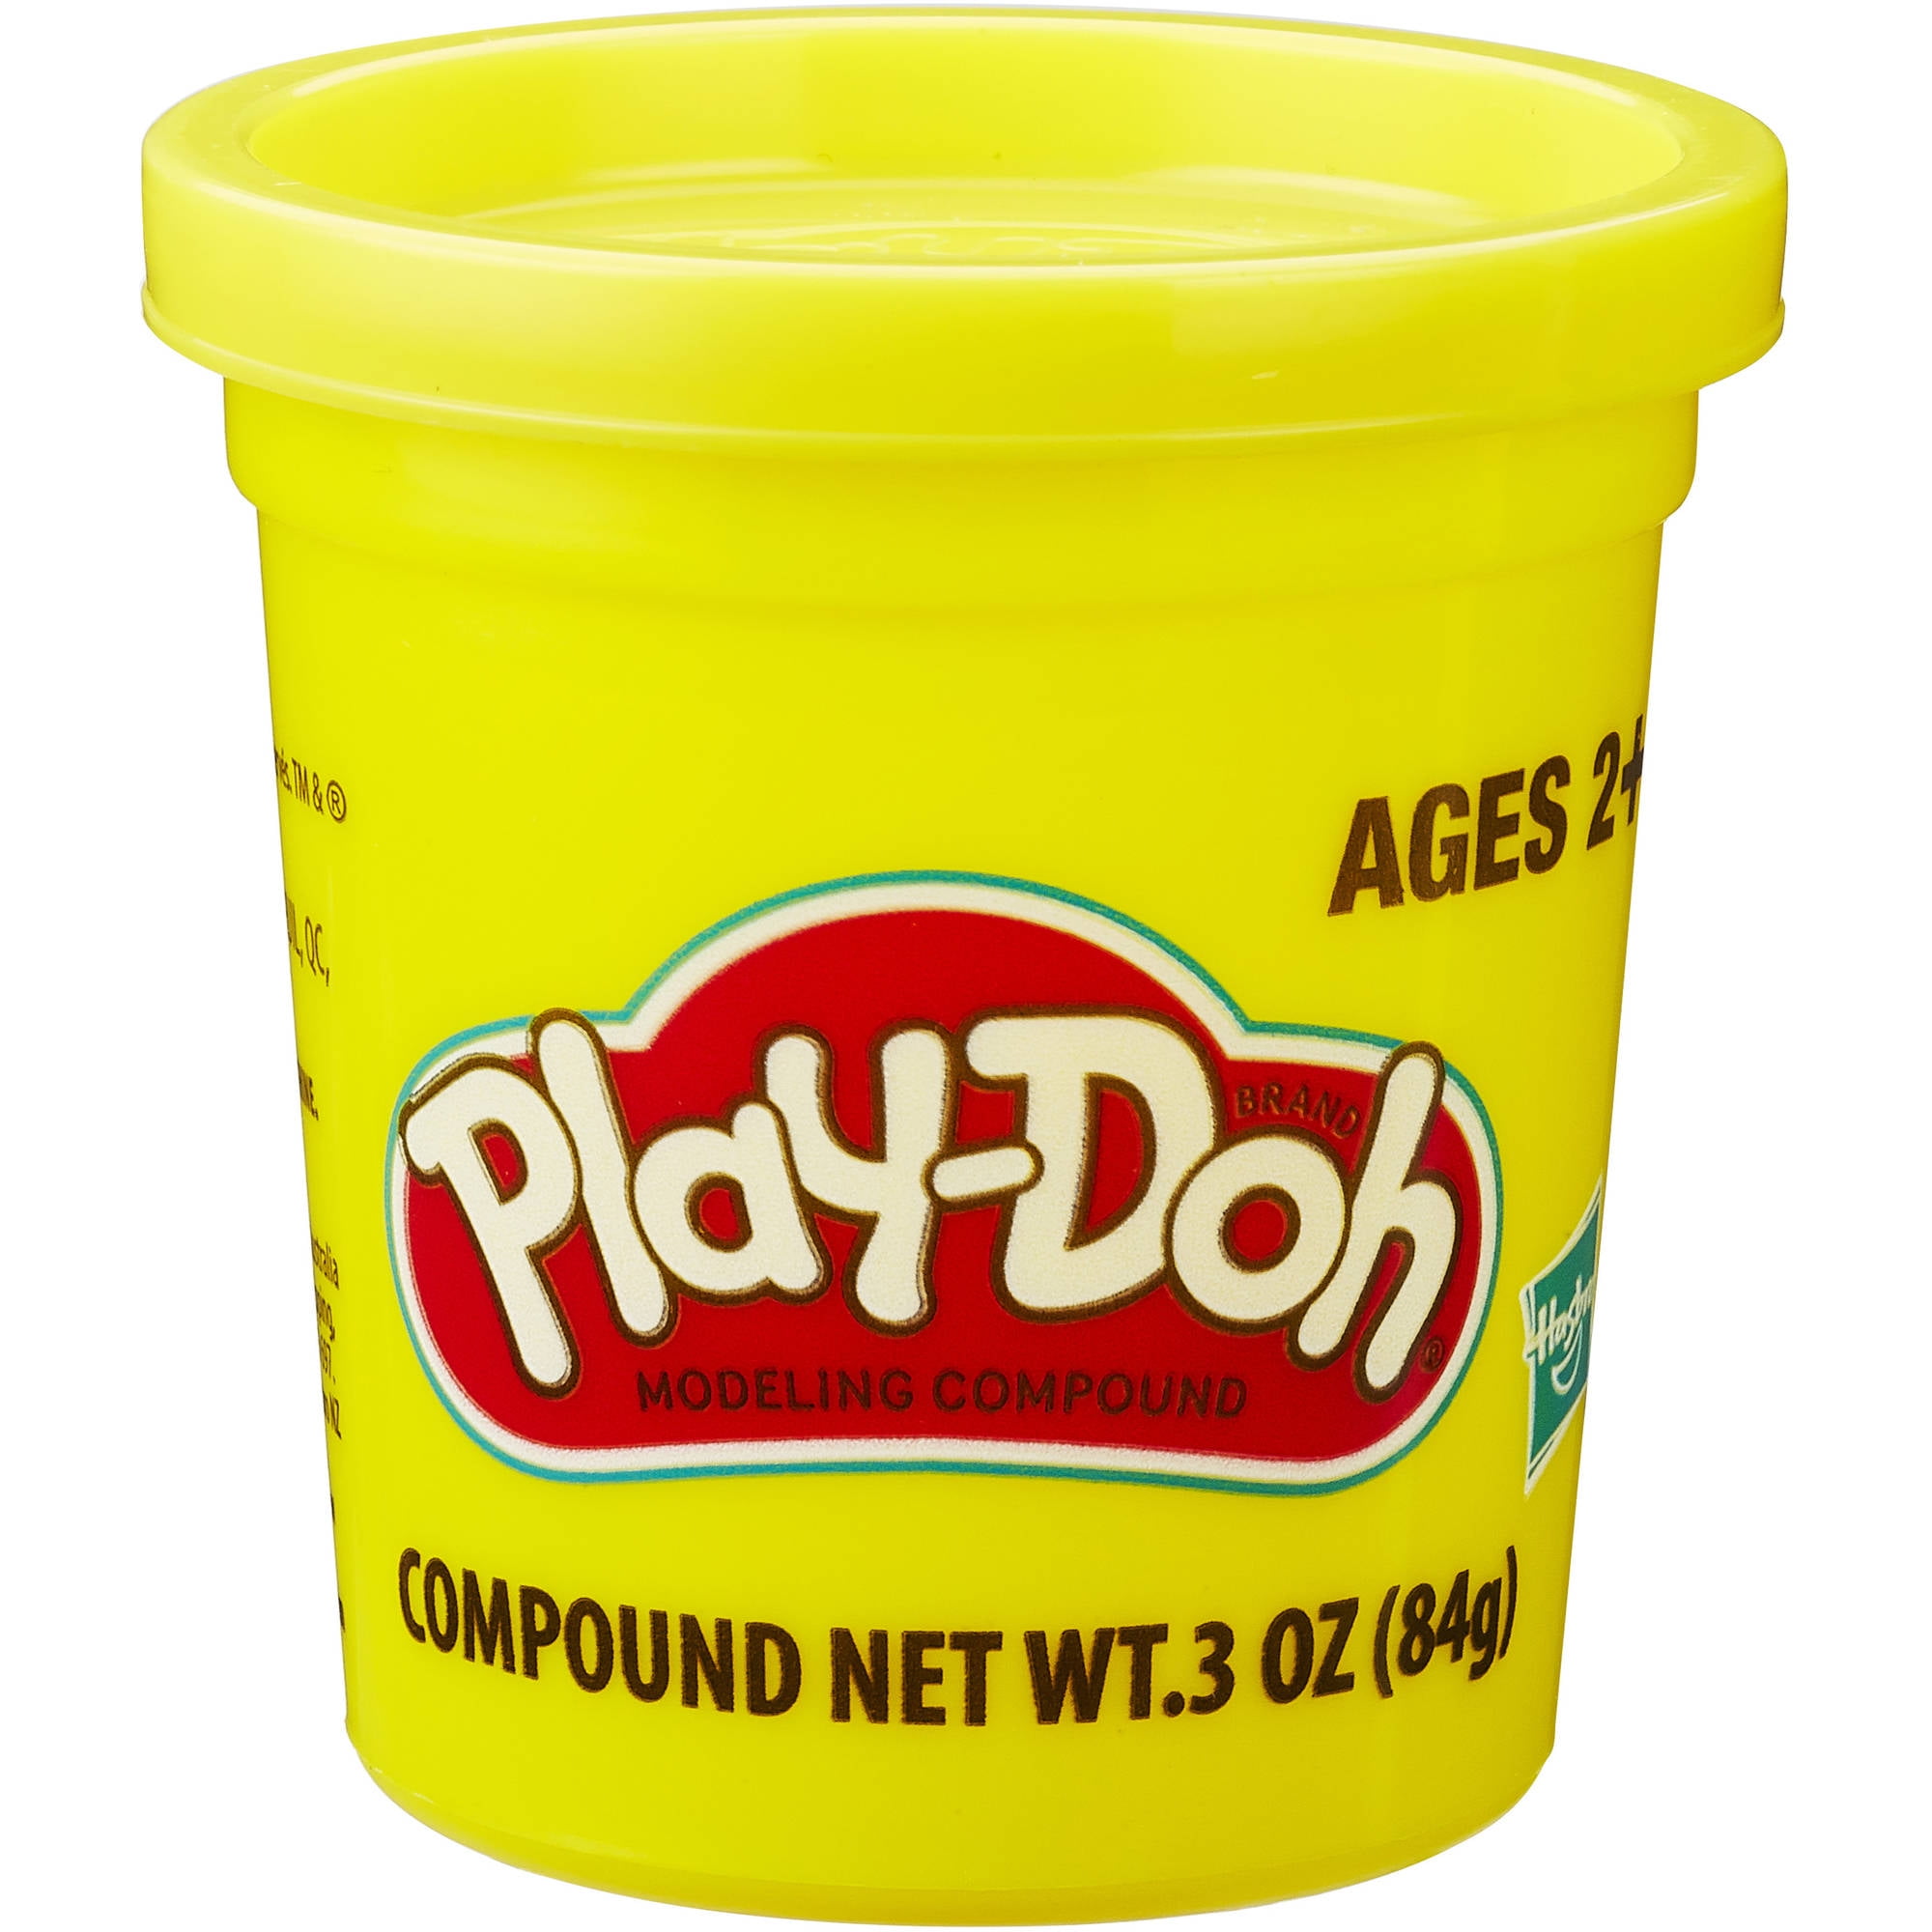 Play-Doh Modeling Compound Yellow